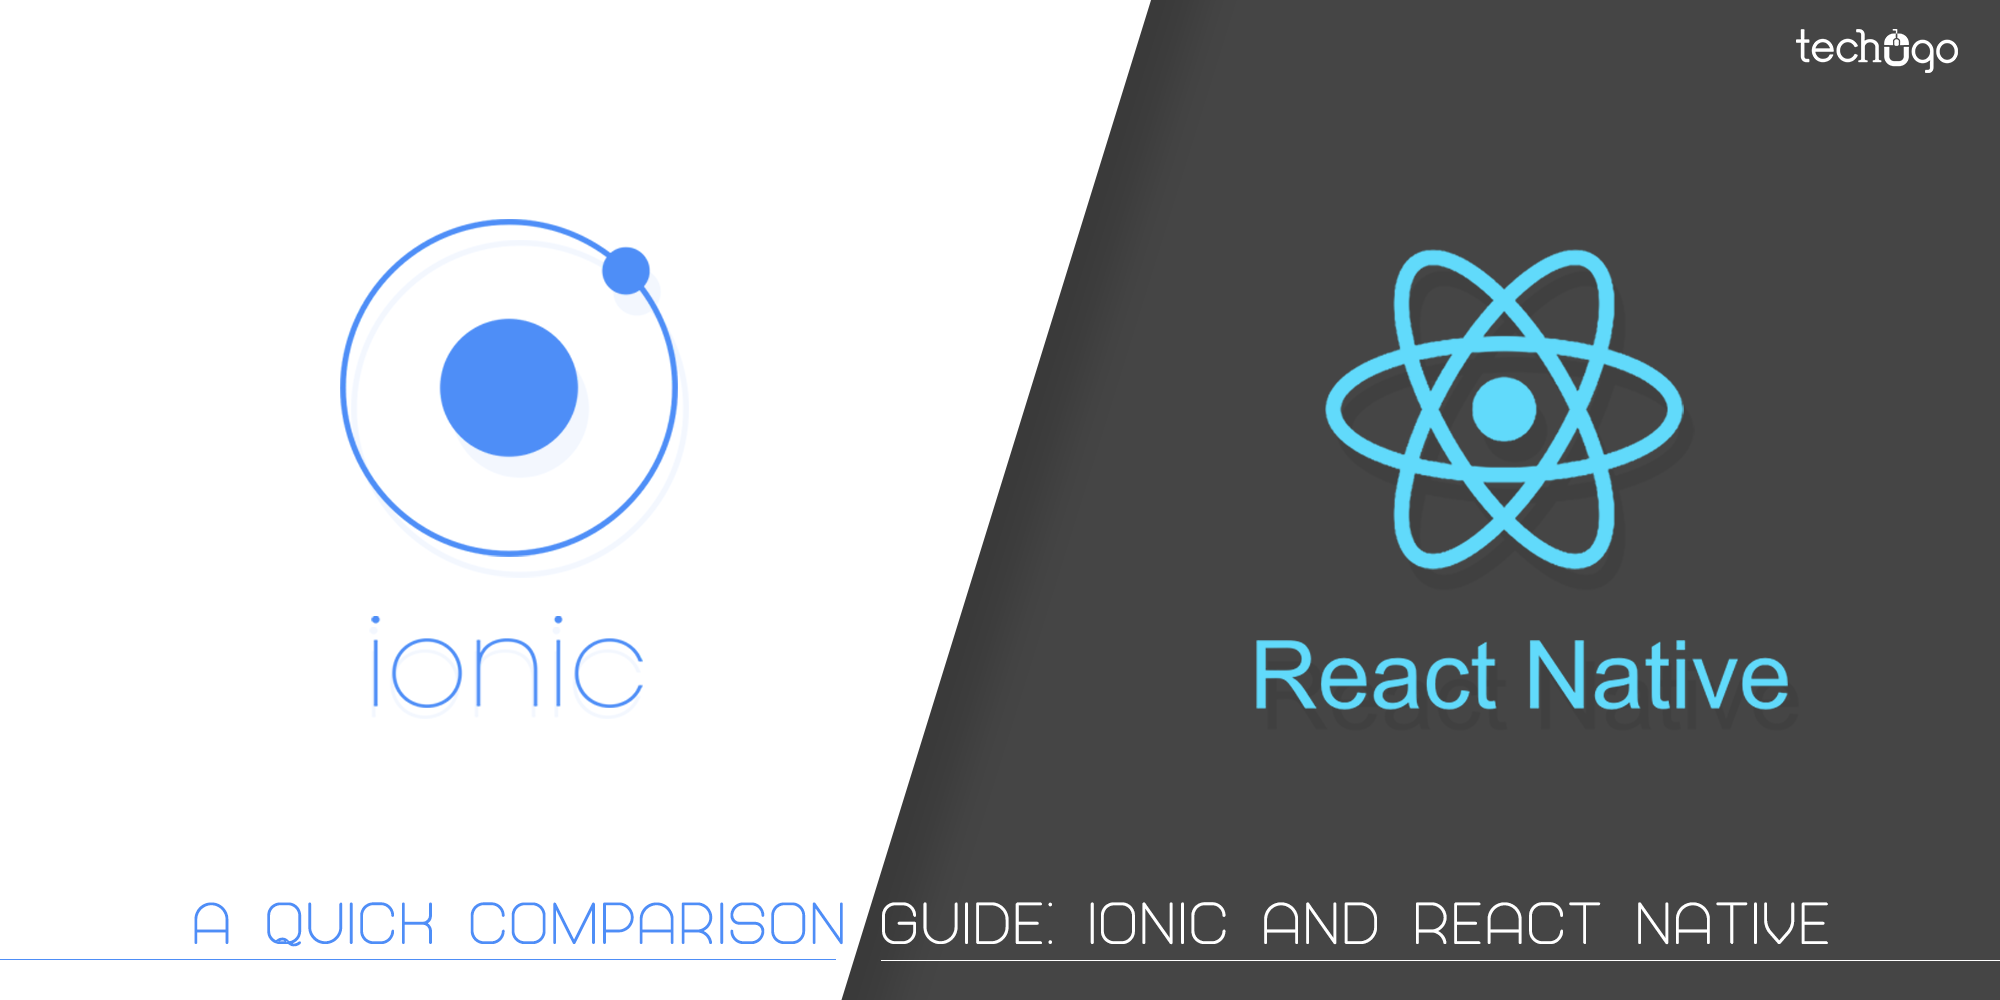 A Quick Comparison Guide: Ionic And React Native